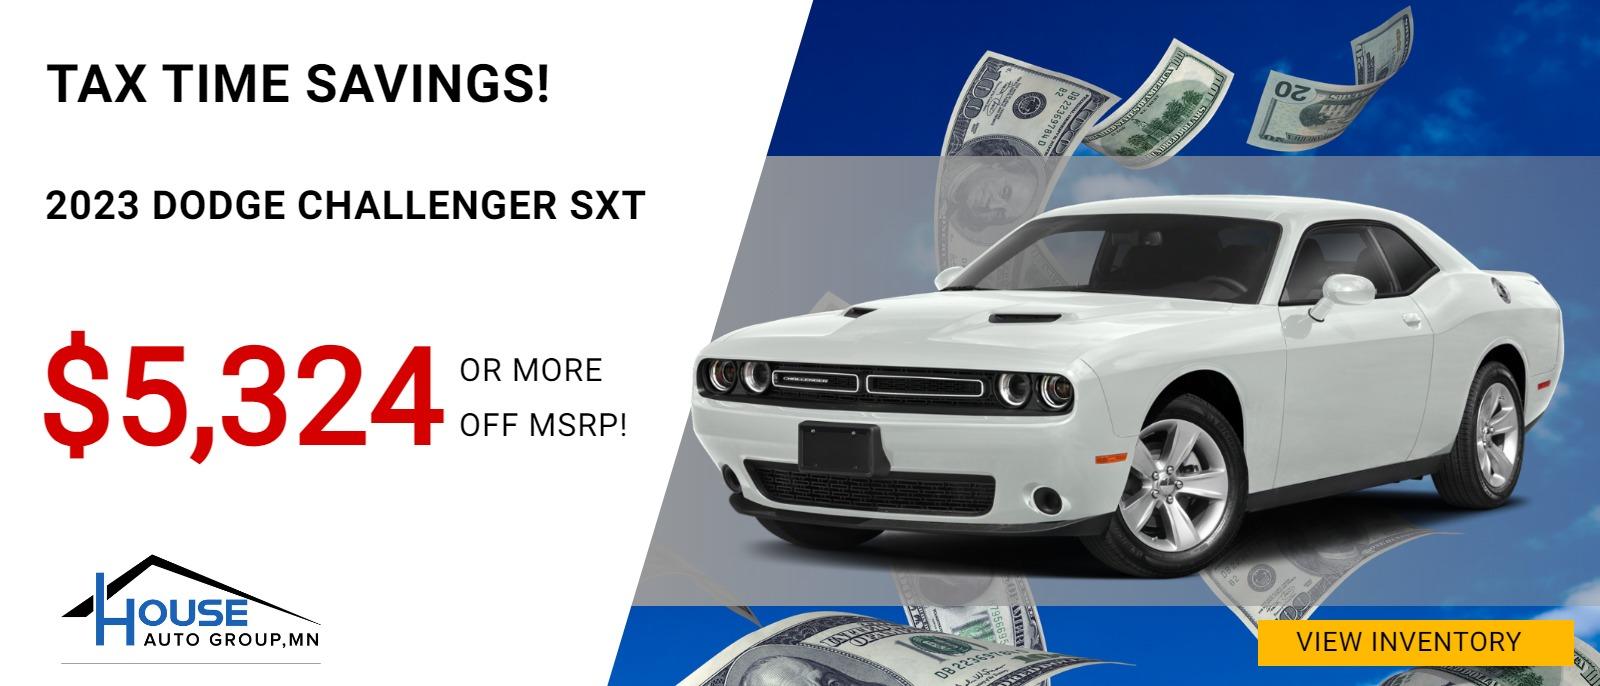 TAX TIME SAVINGS!
2023 Dodge Challenger SXT - $5,324 Or More Off MSRP!